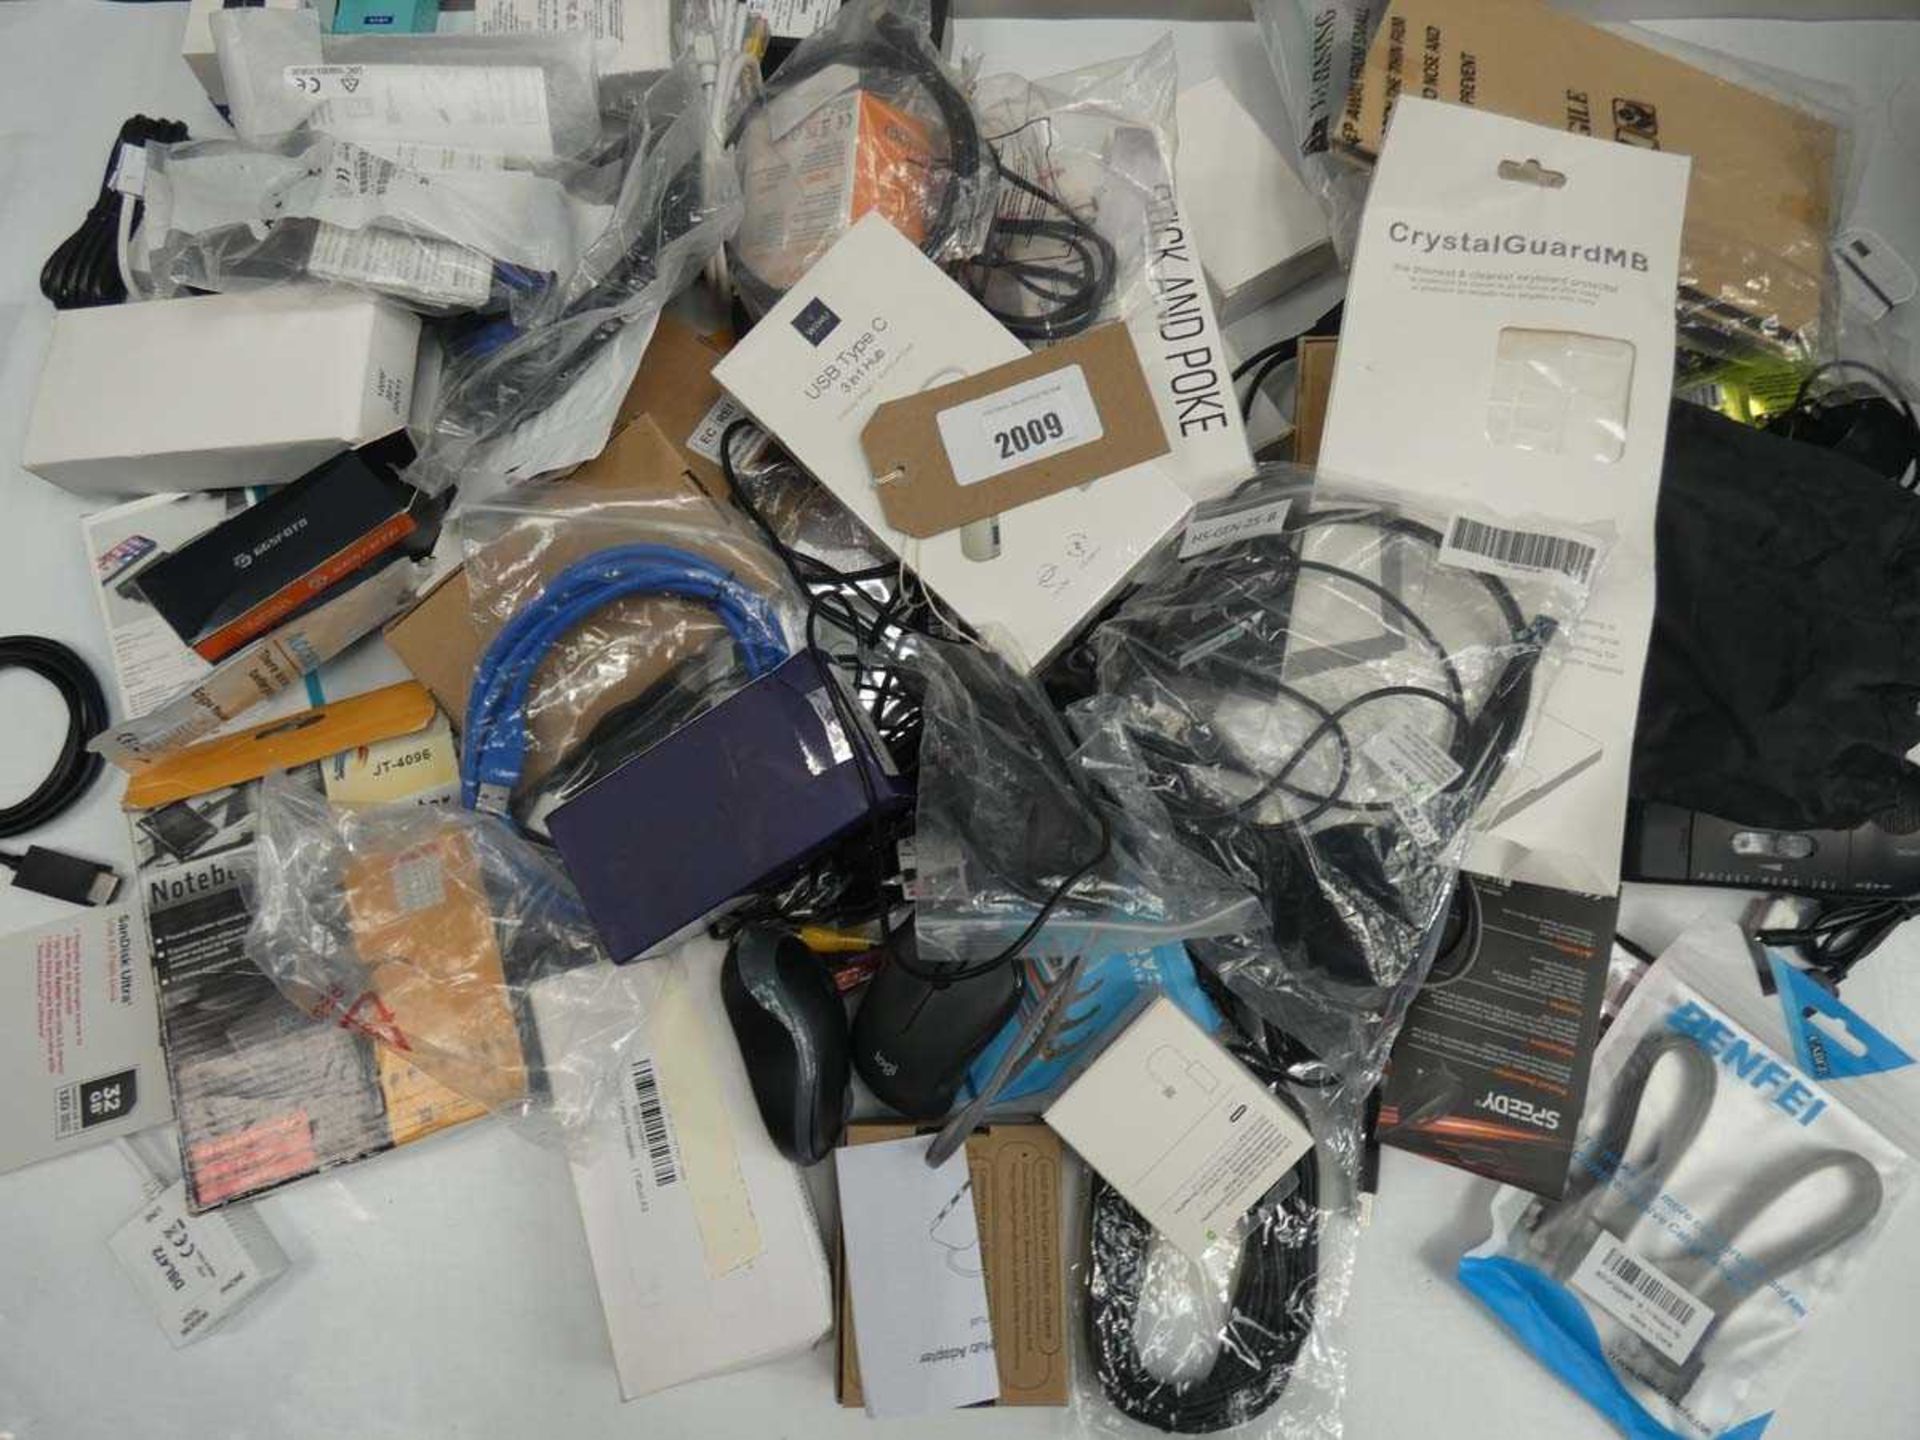 +VAT Bag containing cables, PSUs, PC mice, headsets, adapters, etc